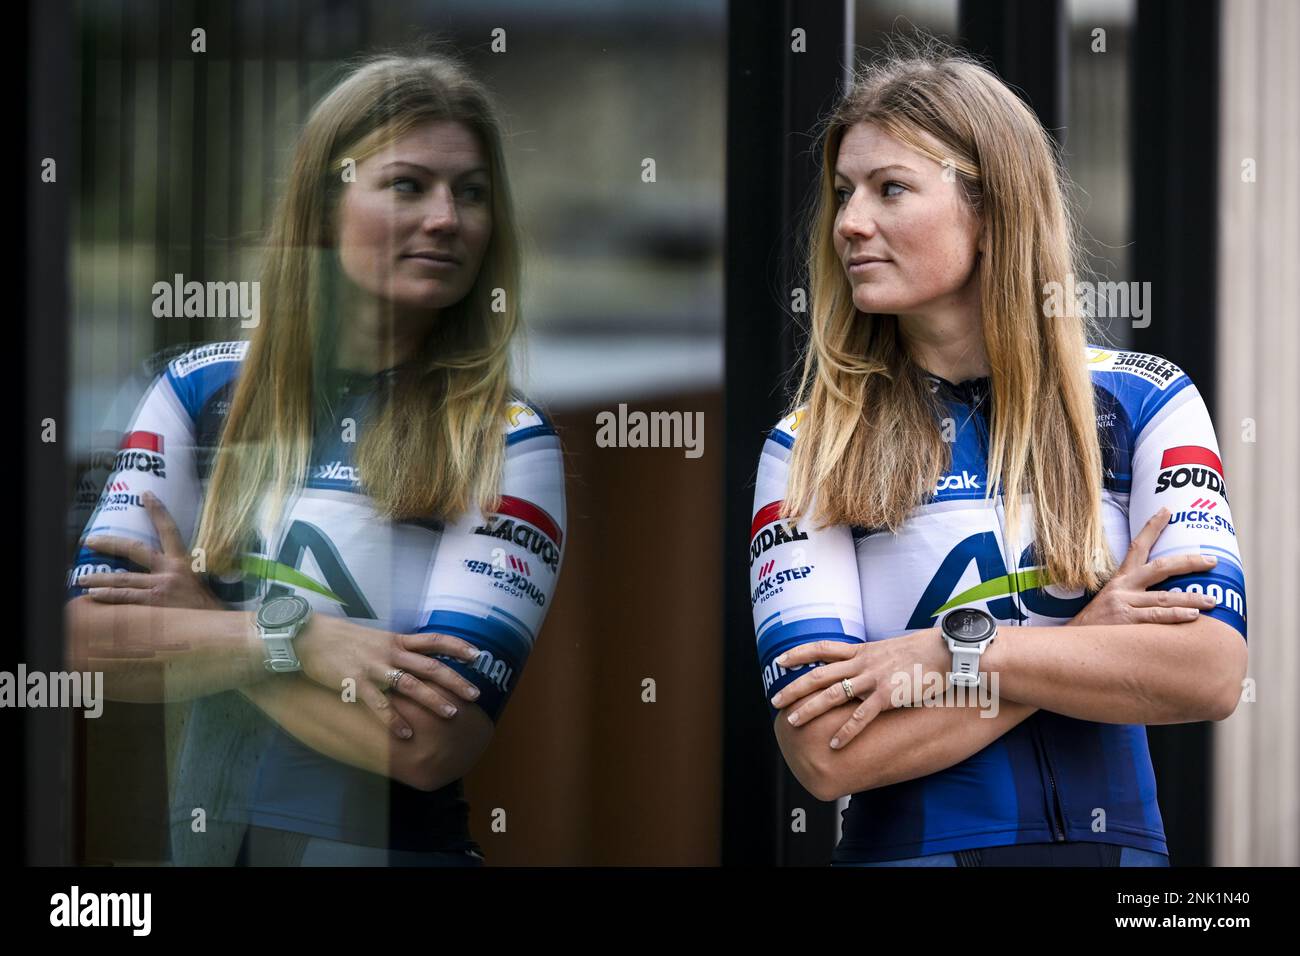 Brussels. 23/02/2023, AG Insurance - Soudal Quick-Step Lotta Henttala poses for the photographer during the presentation of the 2023 roster of the AG Insurance - Soudal Quick-Step women's cycling team, Thursday 23 February 2023 in Brussels. BELGA PHOTO TOM GOYVAERTS Stock Photo